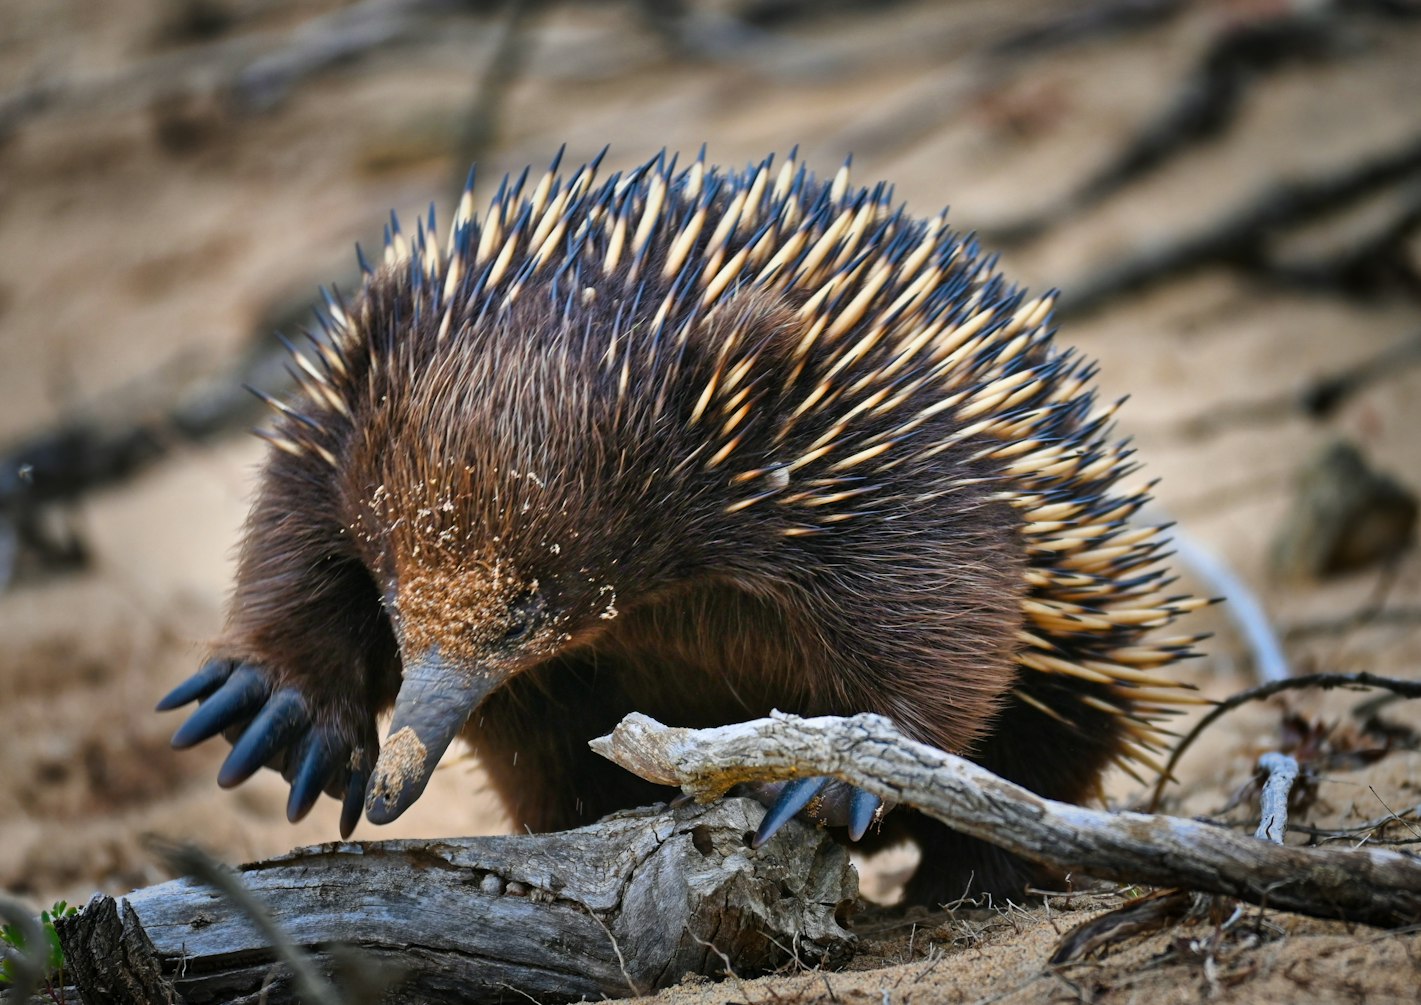 The Echidna: The only mammal that lays eggs